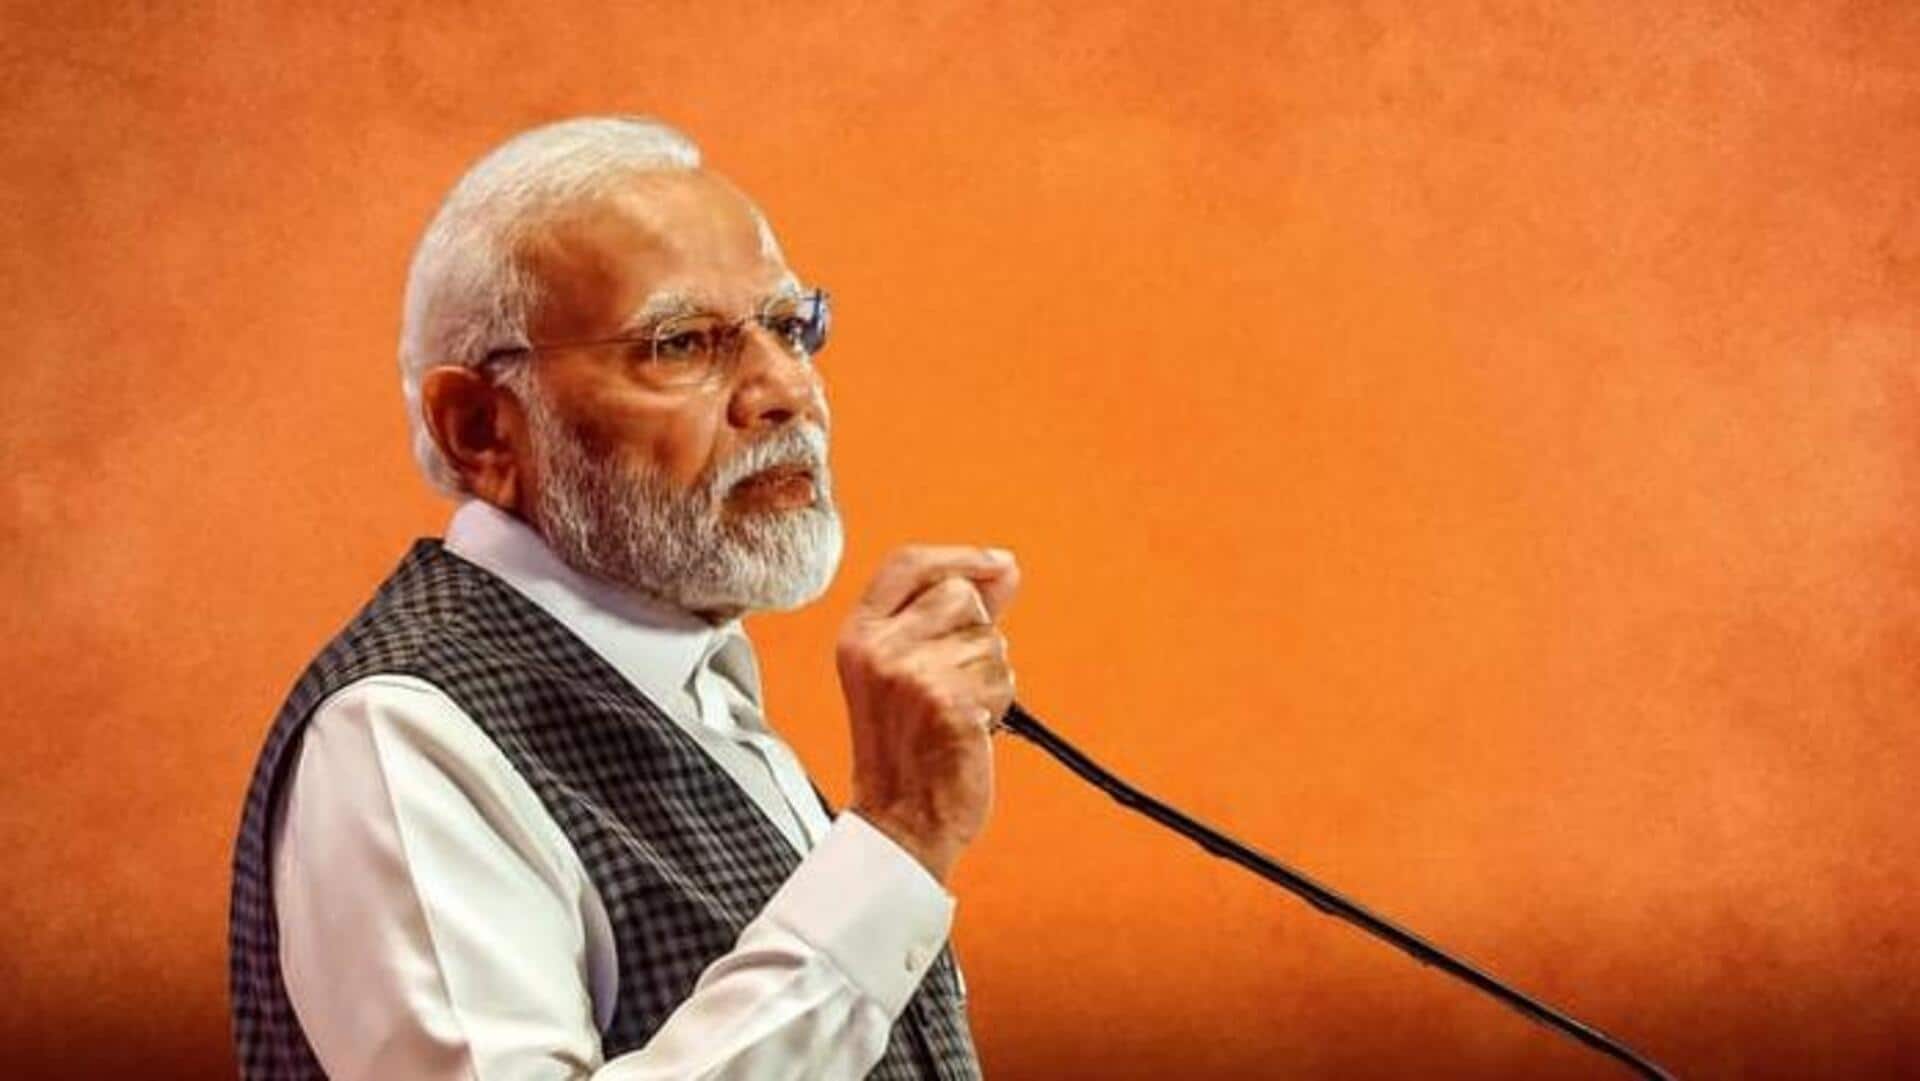 This Navratri special song has lyrics penned by PM Modi